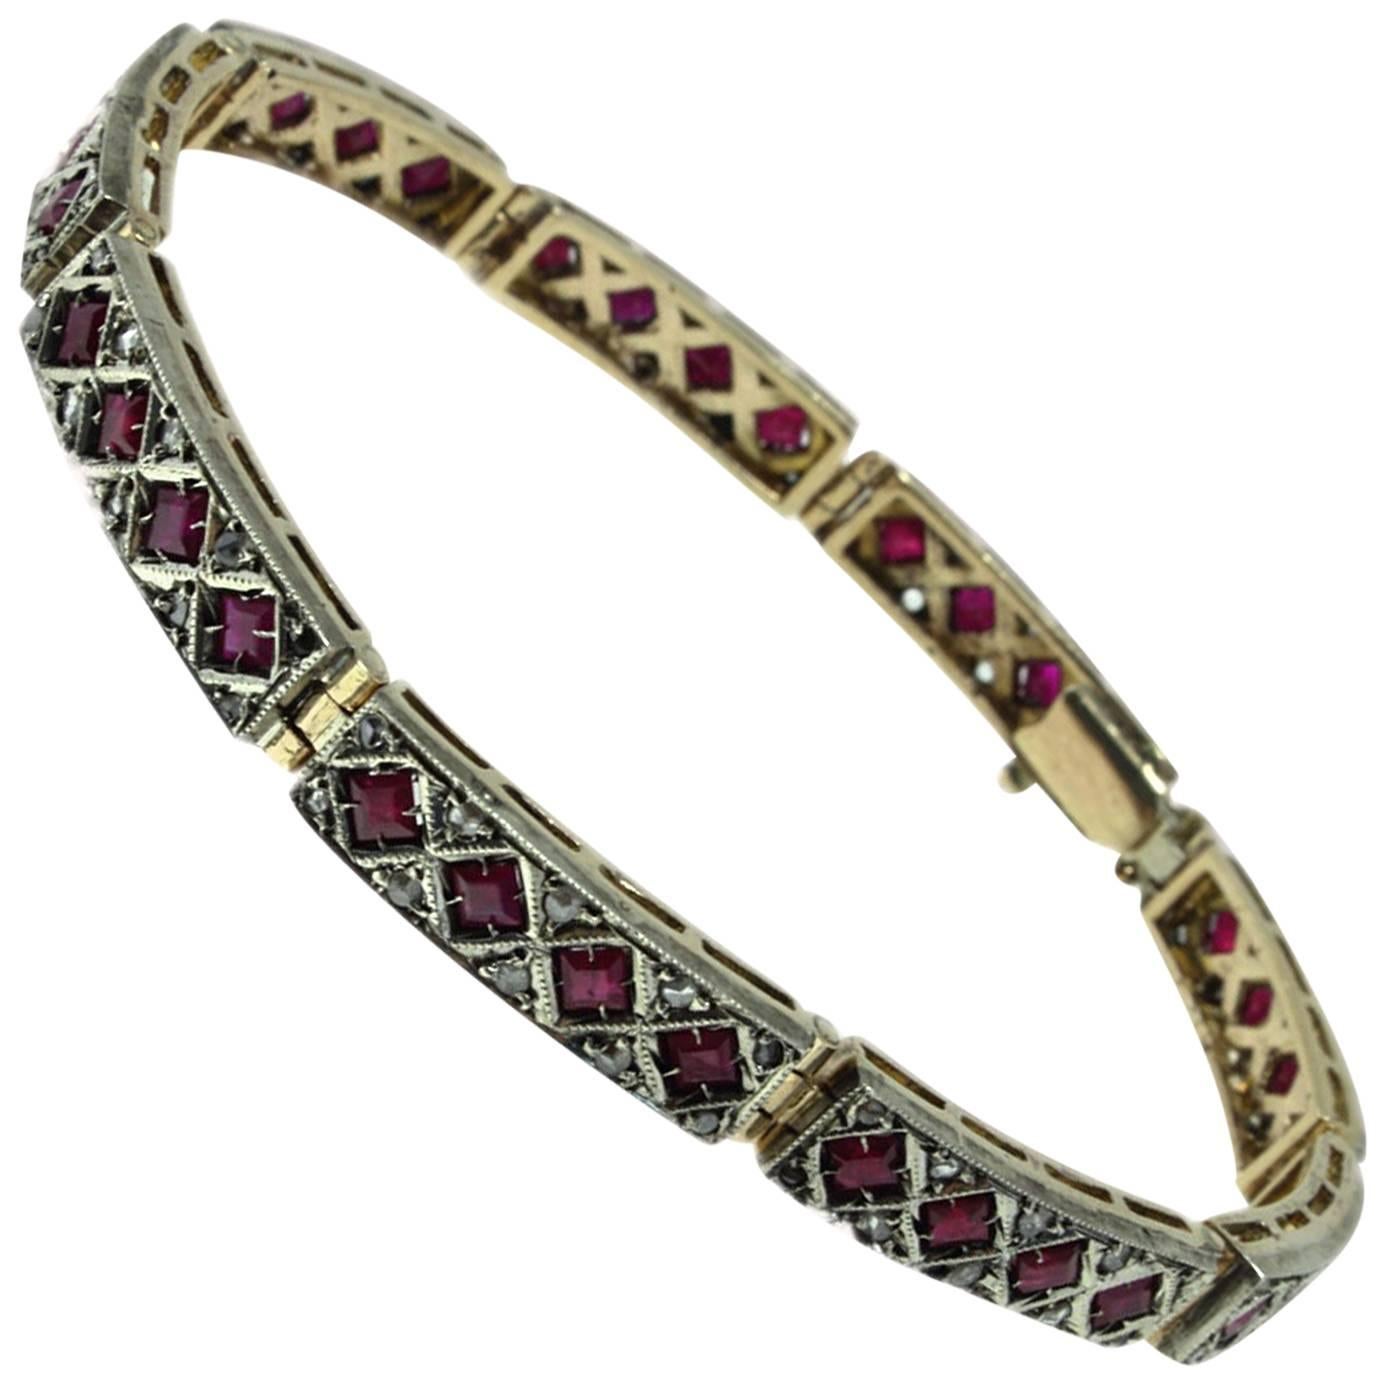  Diamonds and Rubies Rose Gold and Silver Retro Bracelet